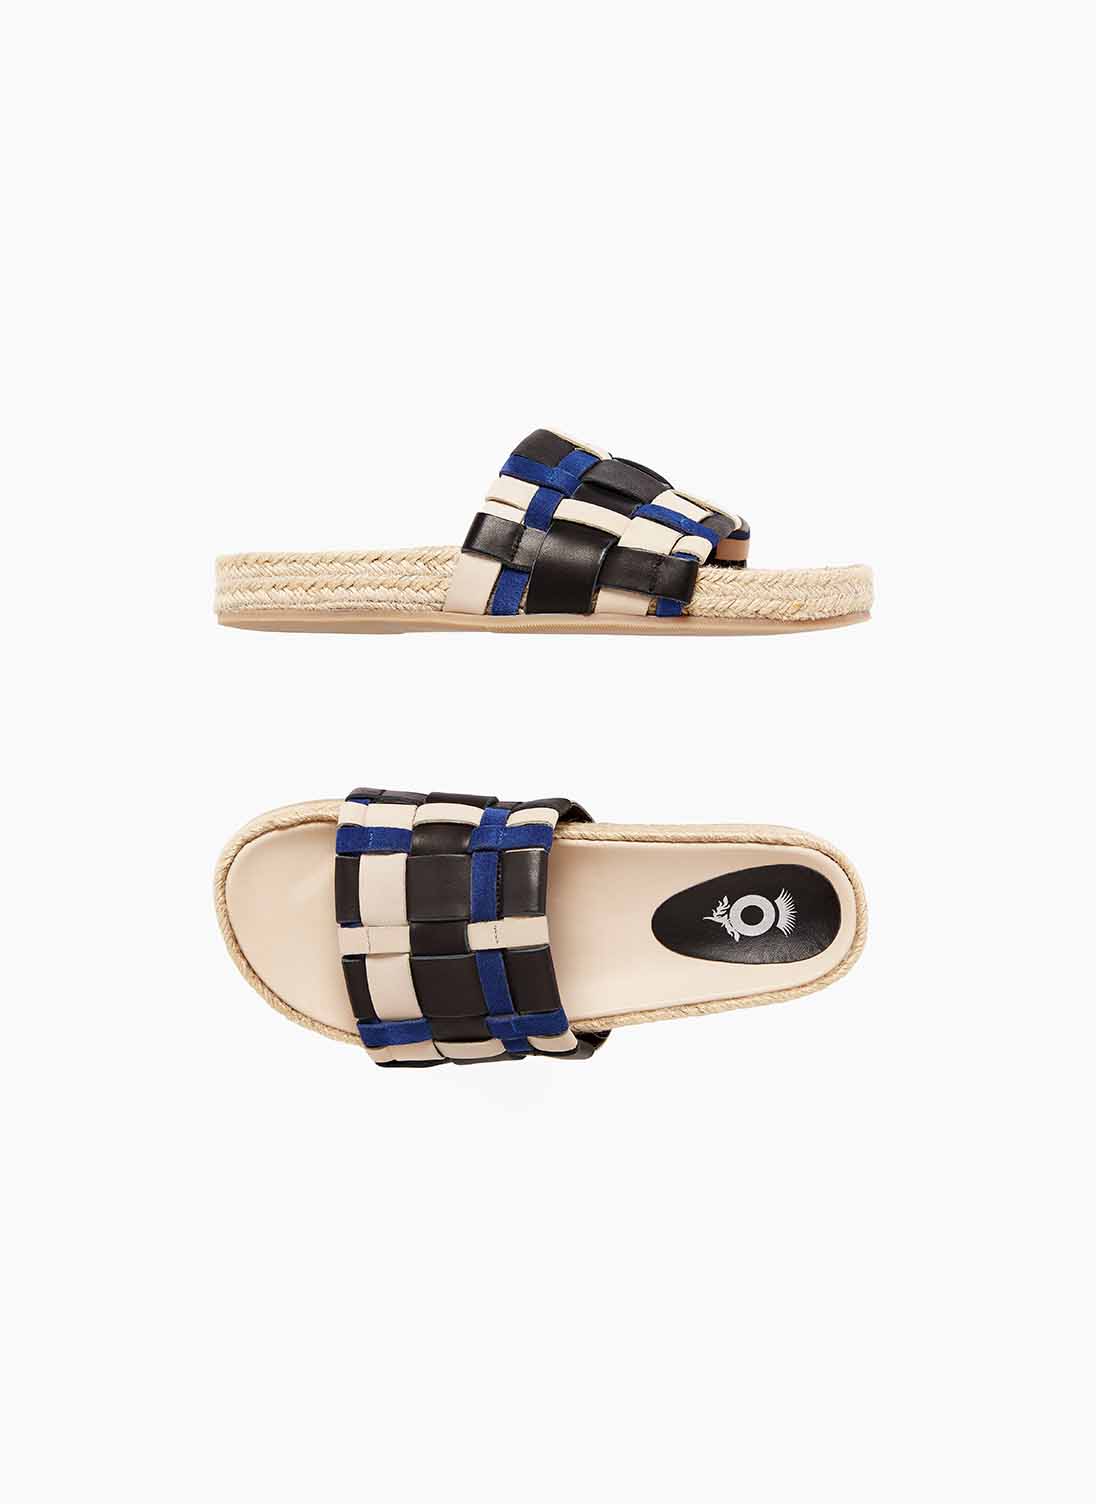 Woven Leather & Suede Slider Black & Navy